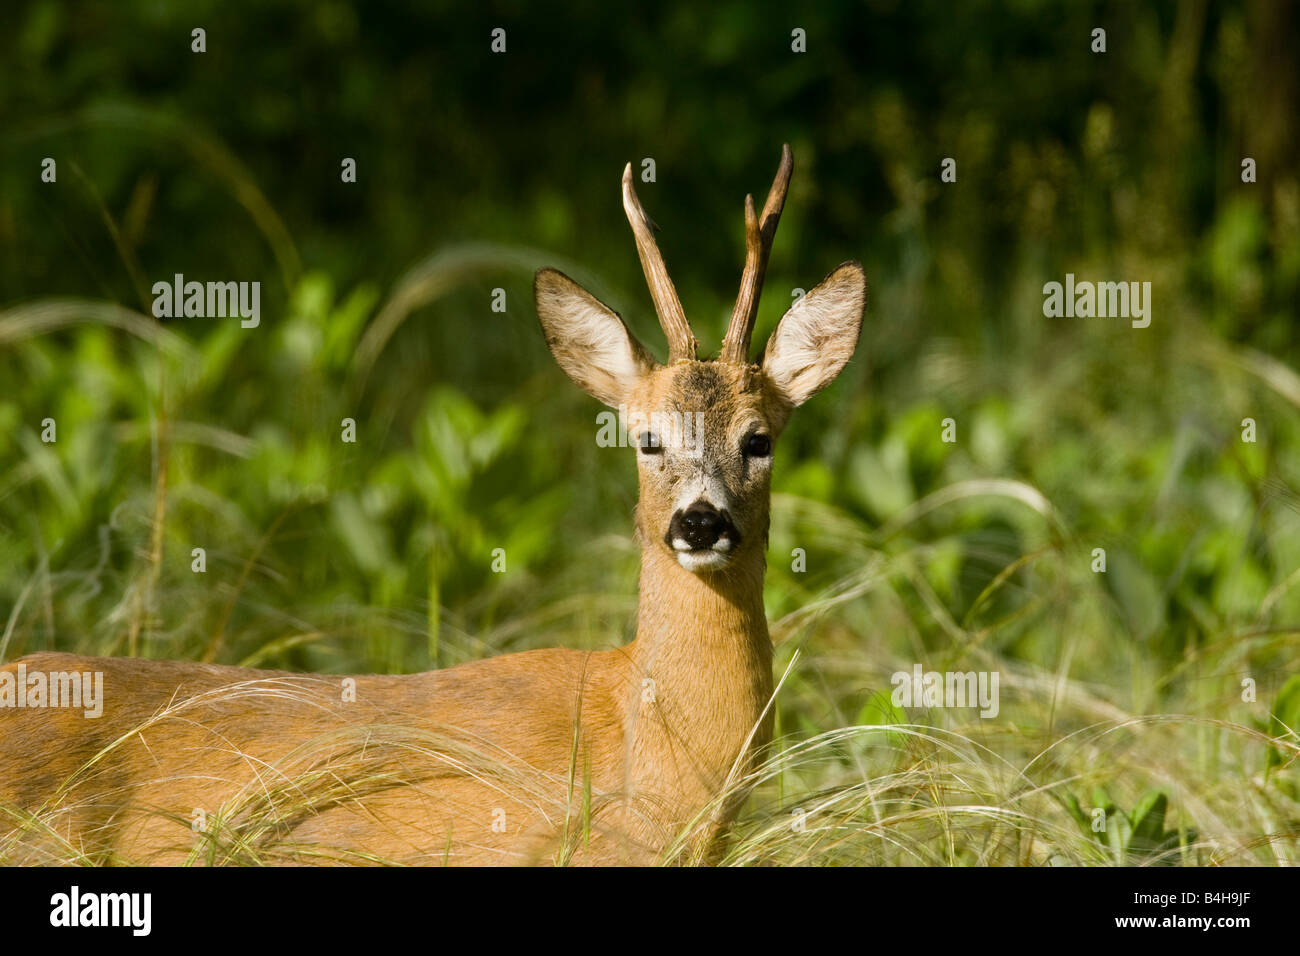 Close-up of European Roe Deer (Capreolus capreolus) standing in forest Stock Photo